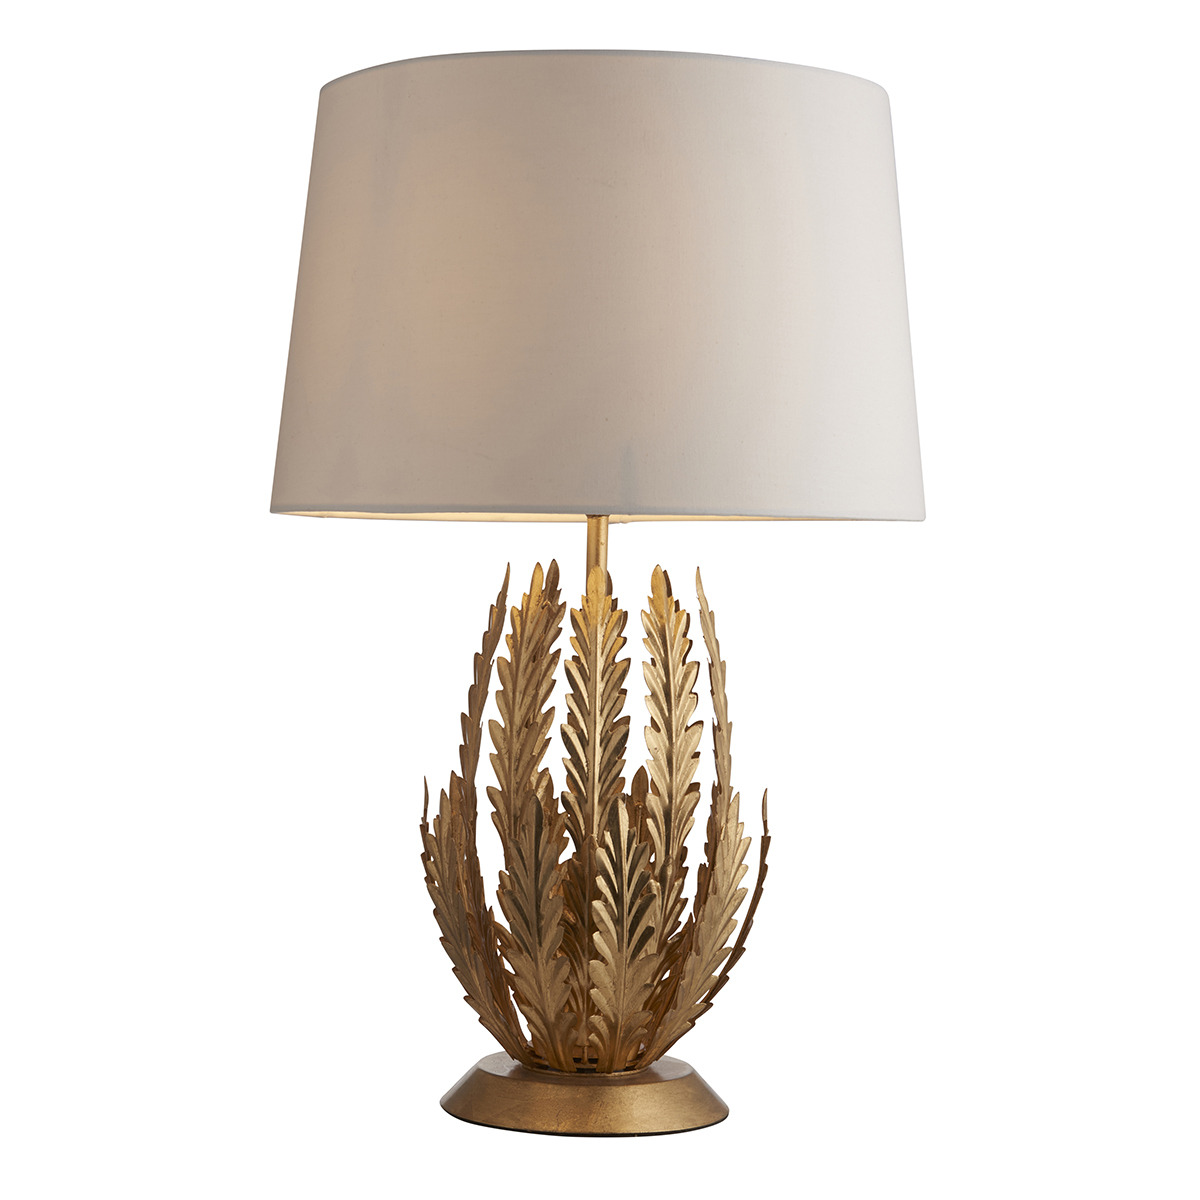 Arden Table Lamp in Gold Leaf with Ivory Cotton Fabric Shade